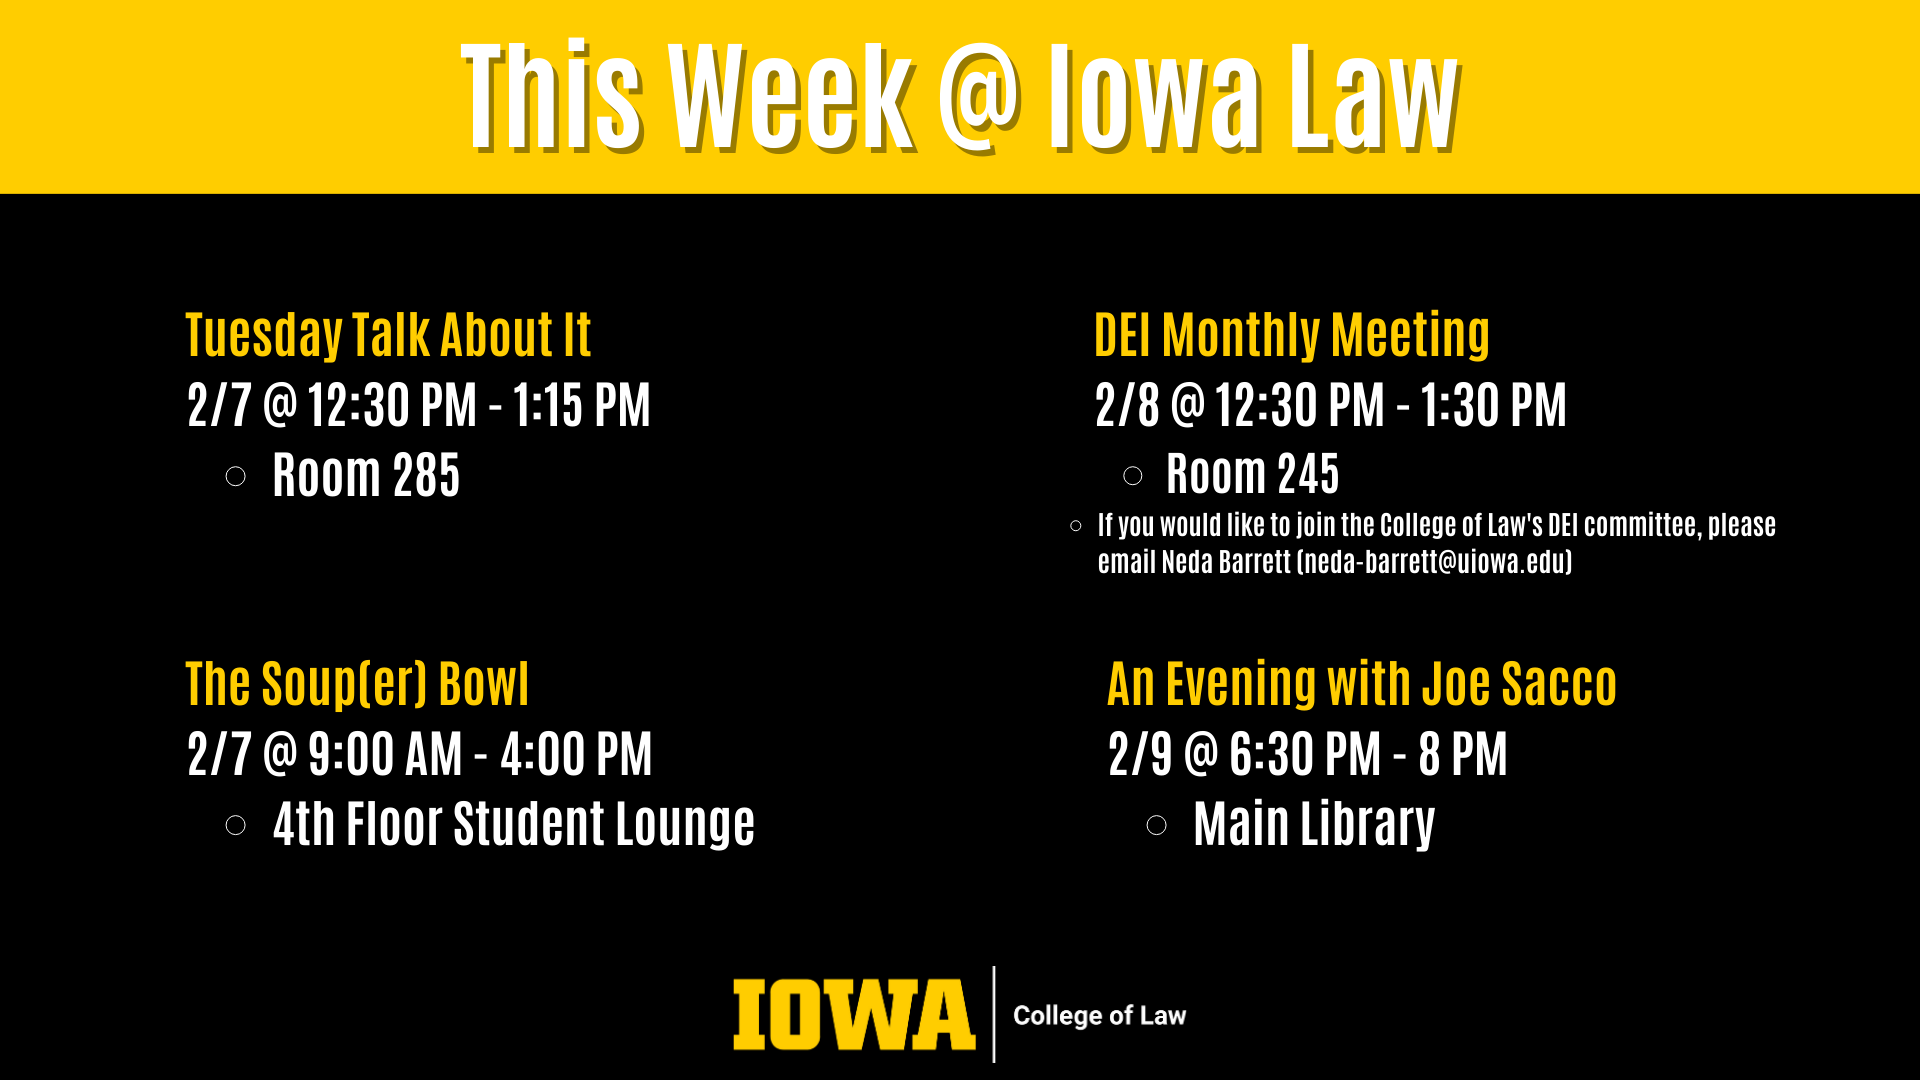 This Week @ Iowa Law An Evening with Joe Sacco 2/9 @ 6:30 PM - 8 PM Main Library DEI Monthly Meeting 2/8 @ 12:30 PM - 1:30 PM Room 245  If you would like to join the College of Law's DEI committee, please email Neda Barrett (neda-barrett@uiowa.edu) Tuesday Talk About It 2/7 @ 12:30 PM - 1:15 PM Room 285 The Soup(er) Bowl 2/7 @ 9:00 AM - 4:00 PM 4th Floor Student Lounge